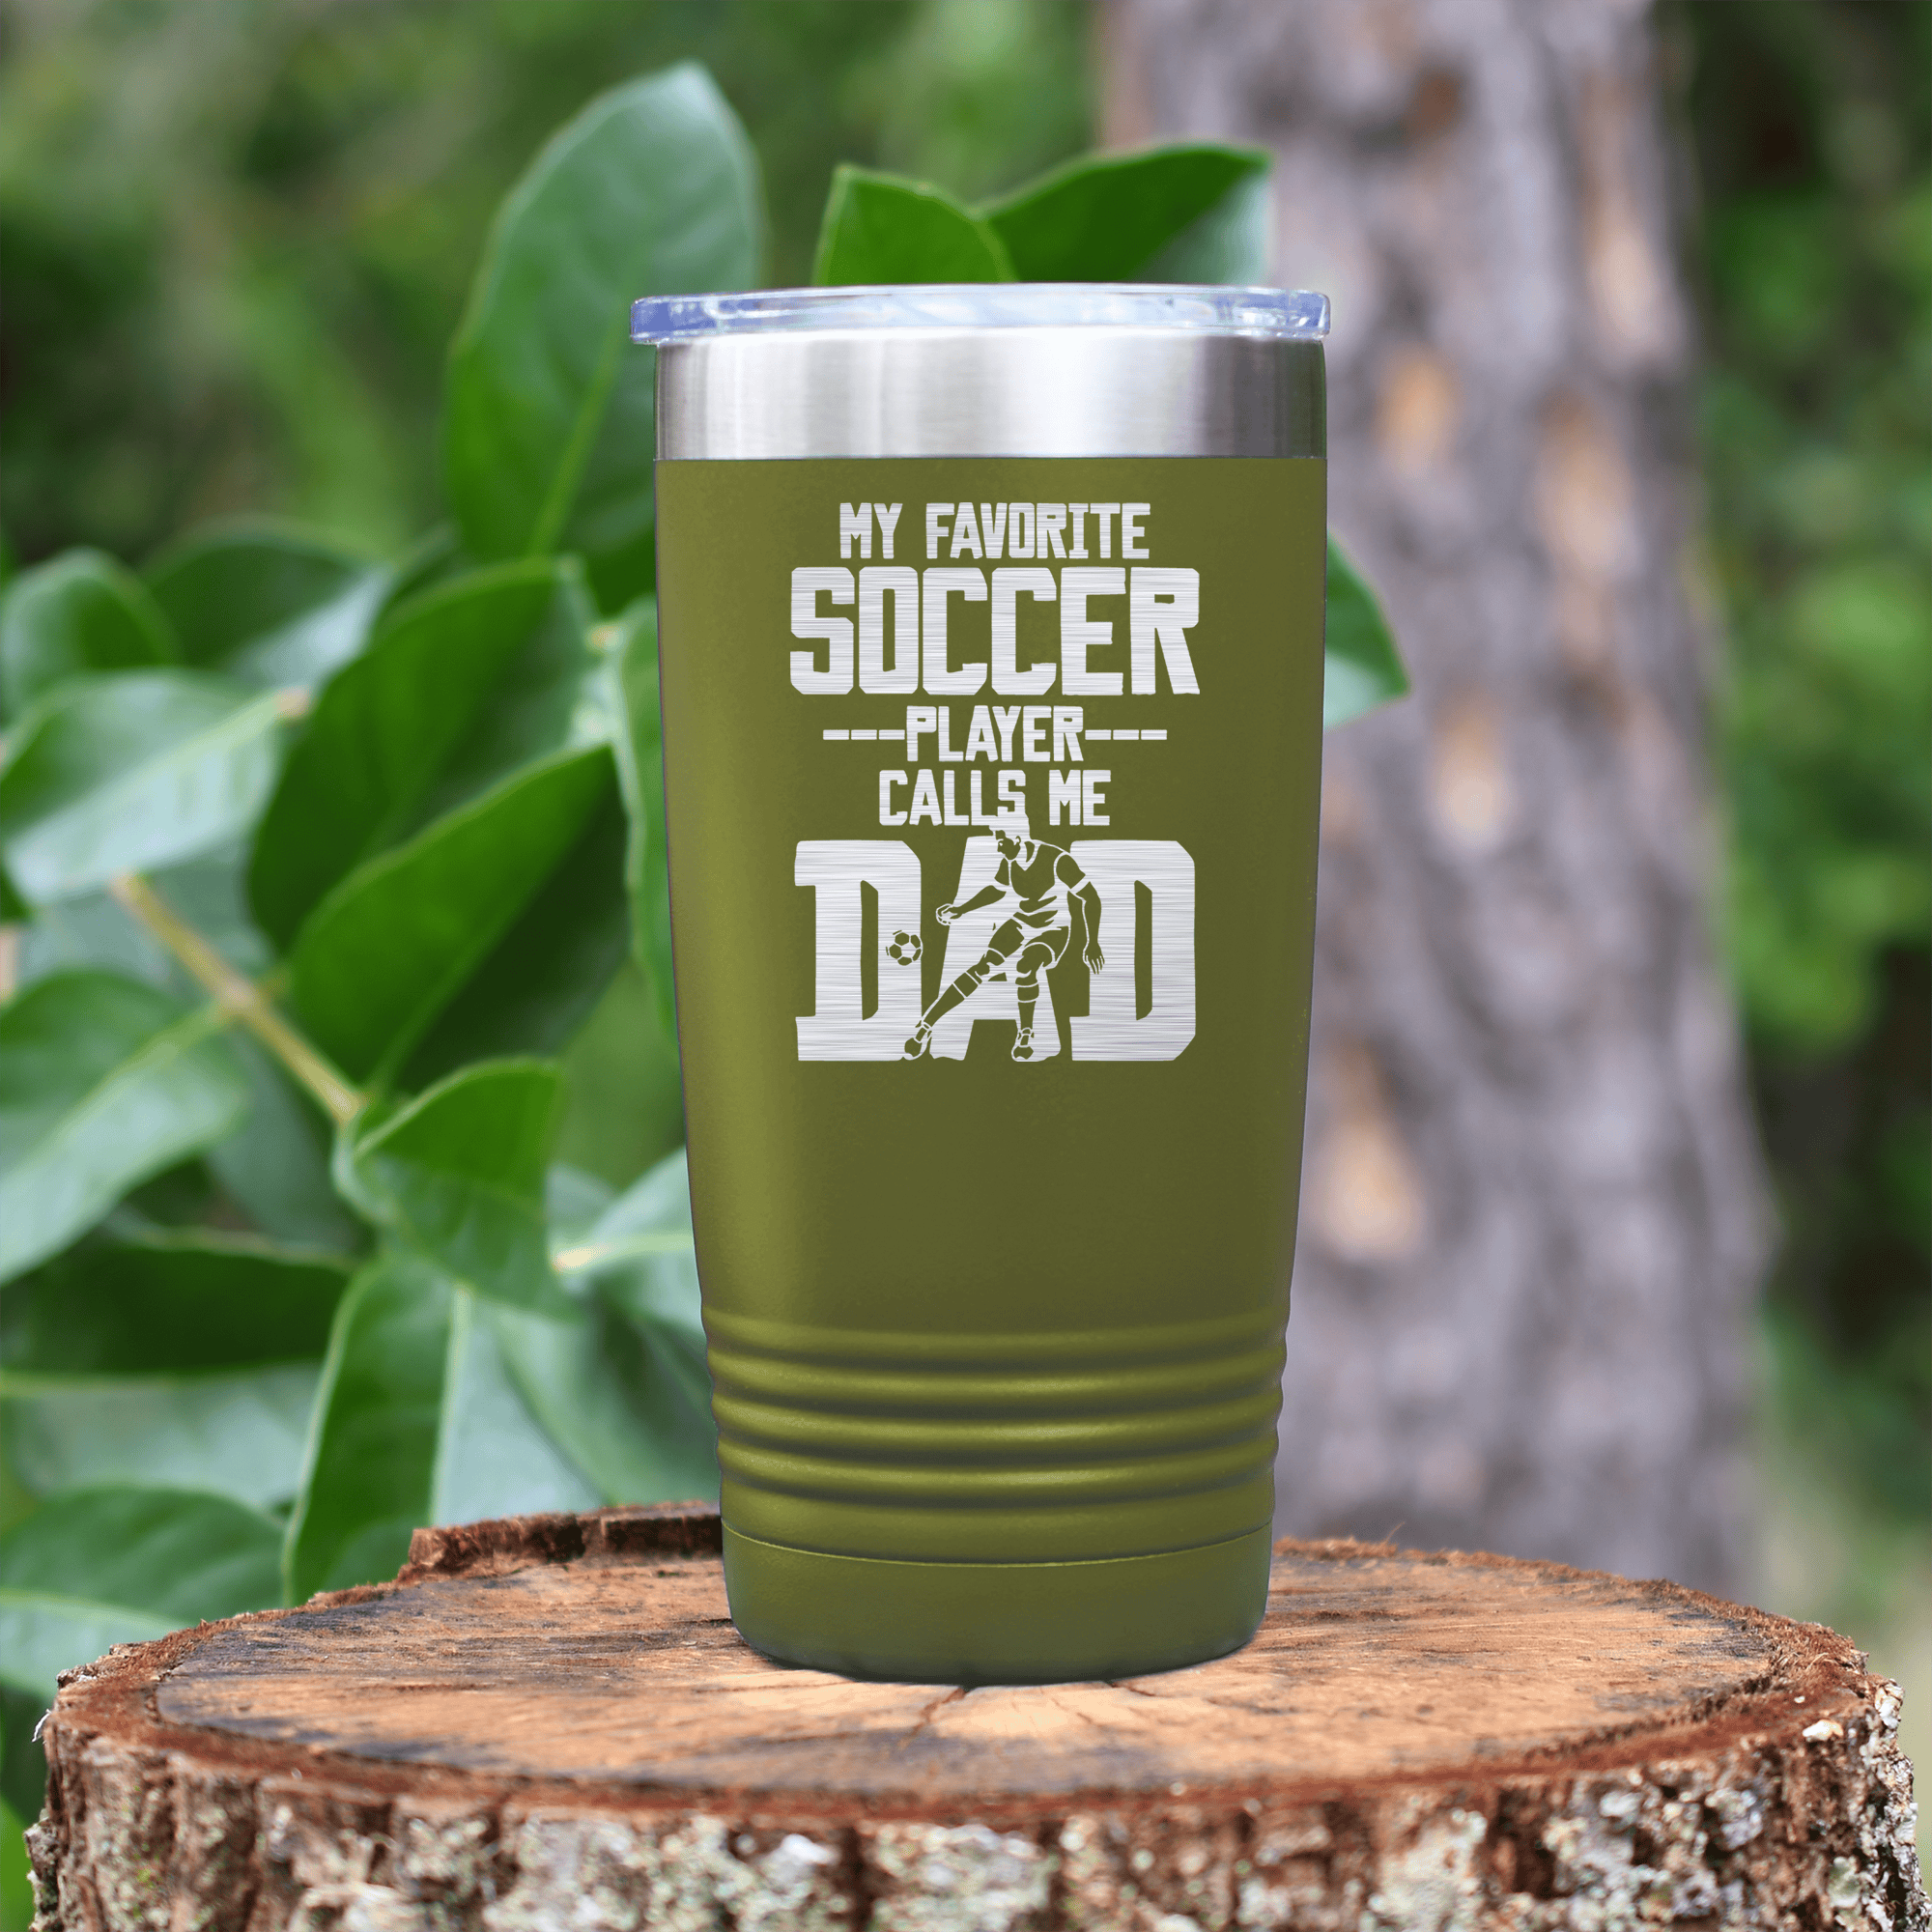 Military Green soccer tumbler Best Soccer Player Calls Me Dad